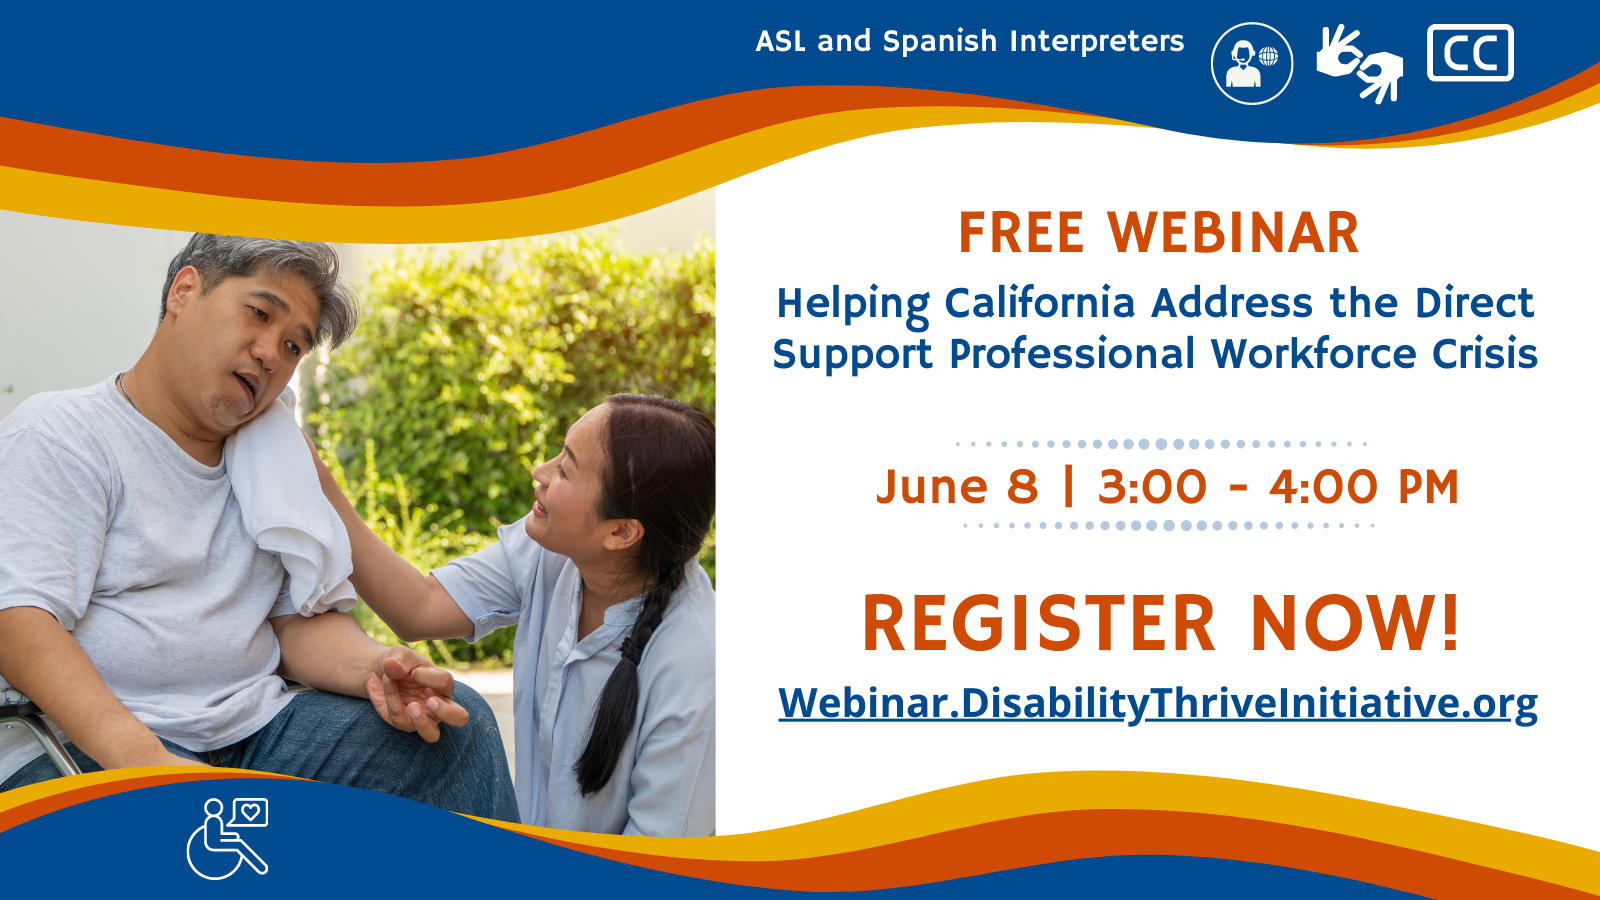 Free webinar: Helping California Address the Direct Support Professional Workforce Crisis, June 8, 3:00 – 4:00 p.m., American sign language and Spanish interpreters, Register now